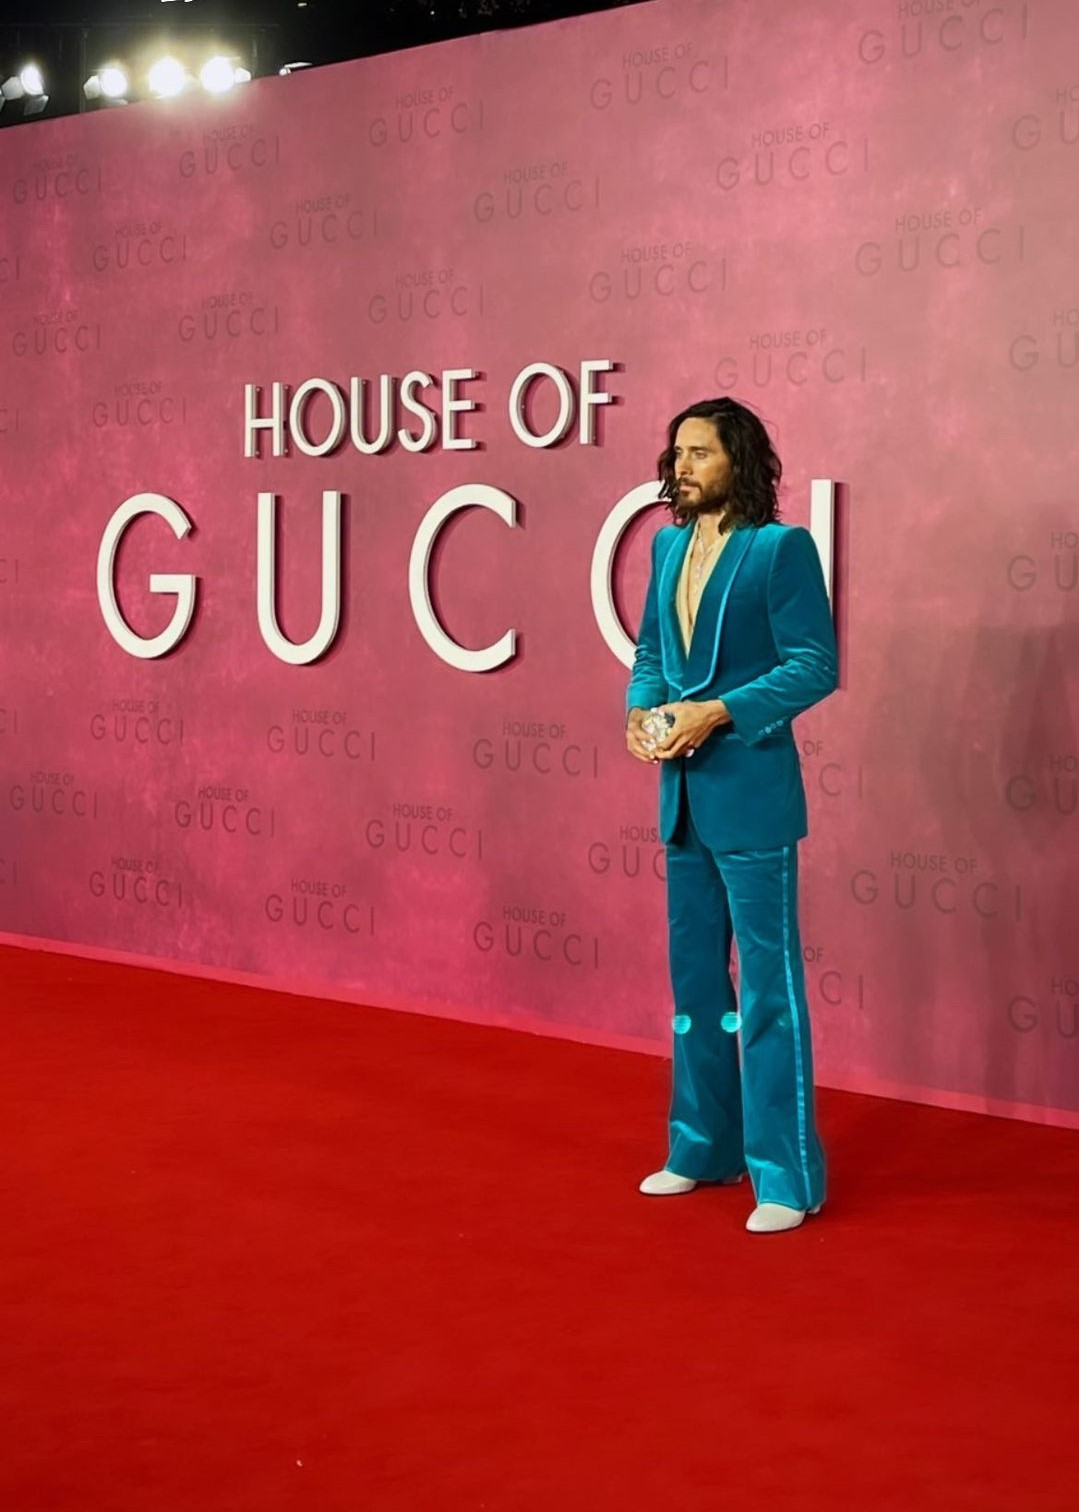 SPOTTED: Jared Letto Sports Velvet Blue Suit for House of Gucci Premiere